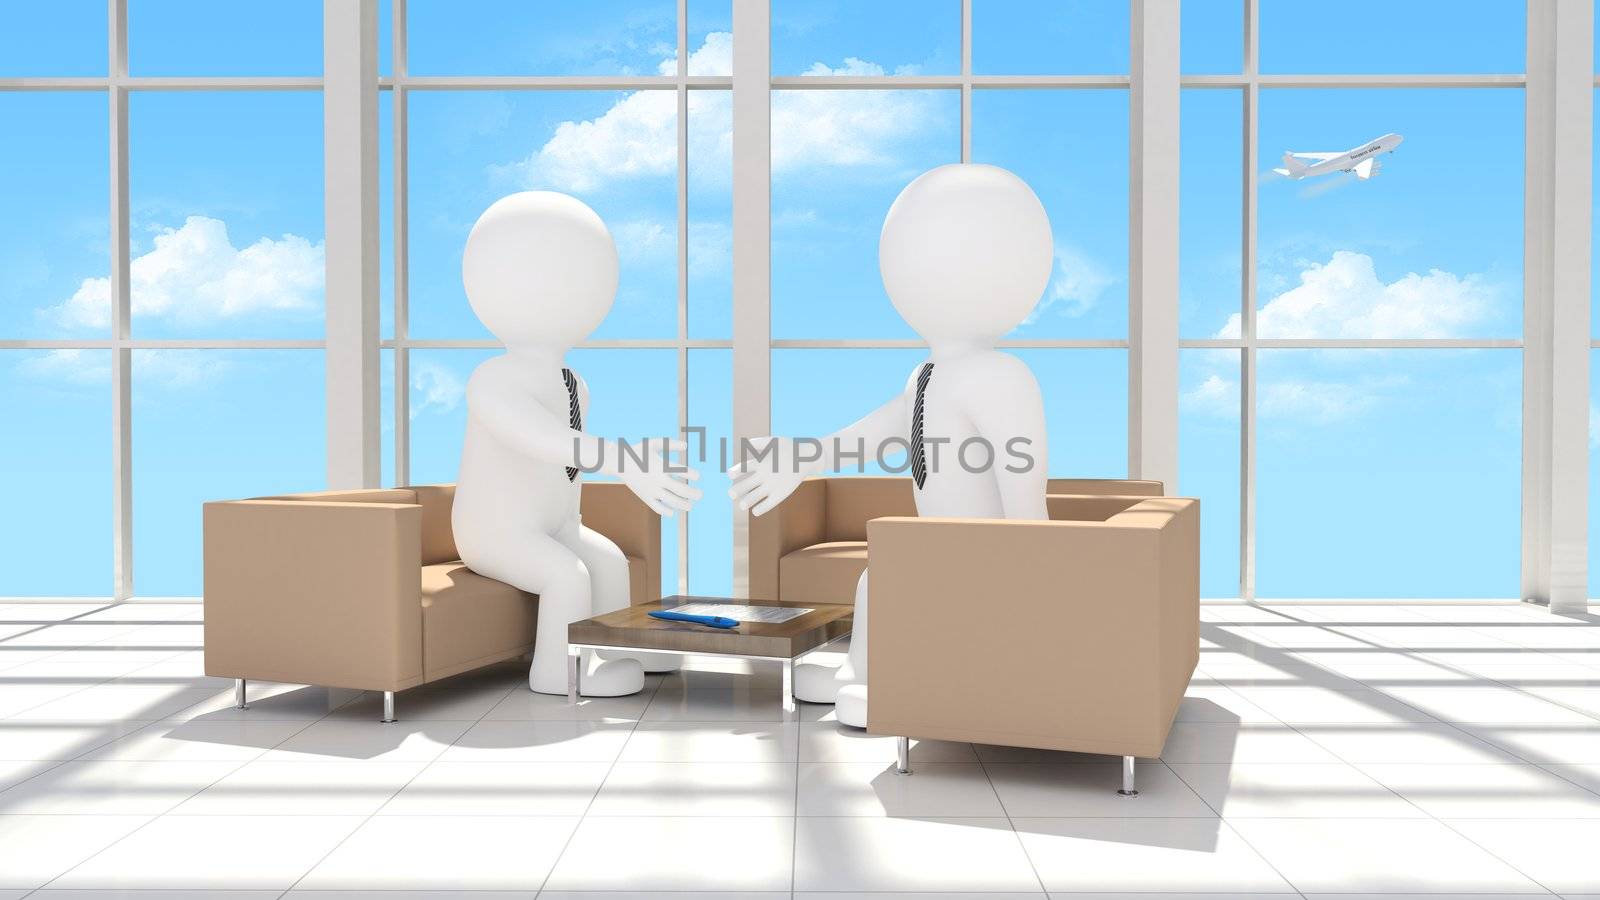 Handshake of two businessmen after signing the contract. Office interior